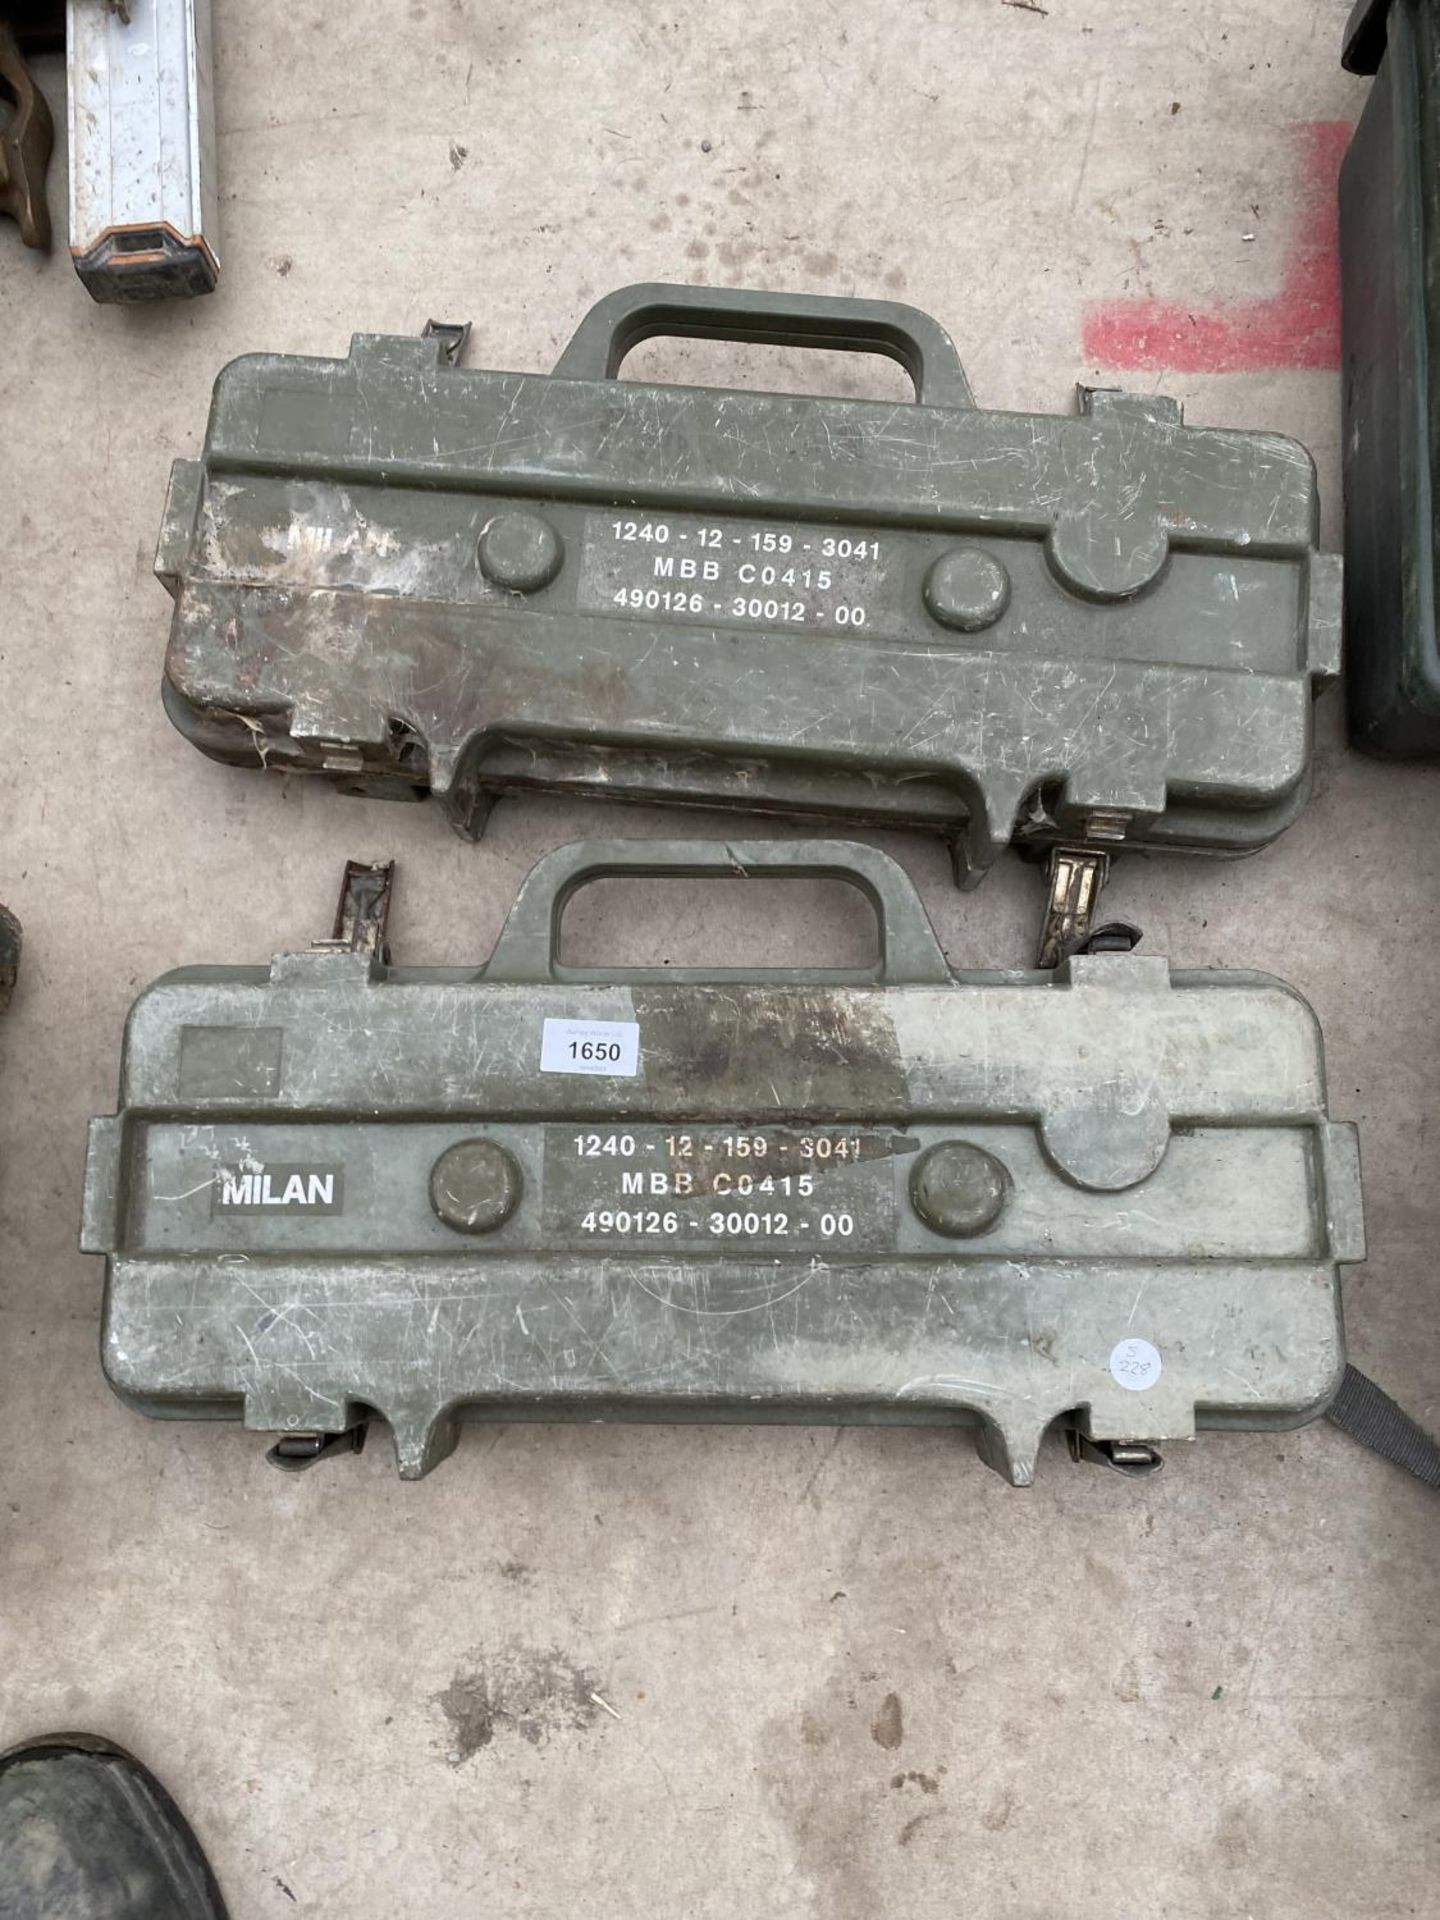 TWO VINTAGE MILITARY STORAGE CASES